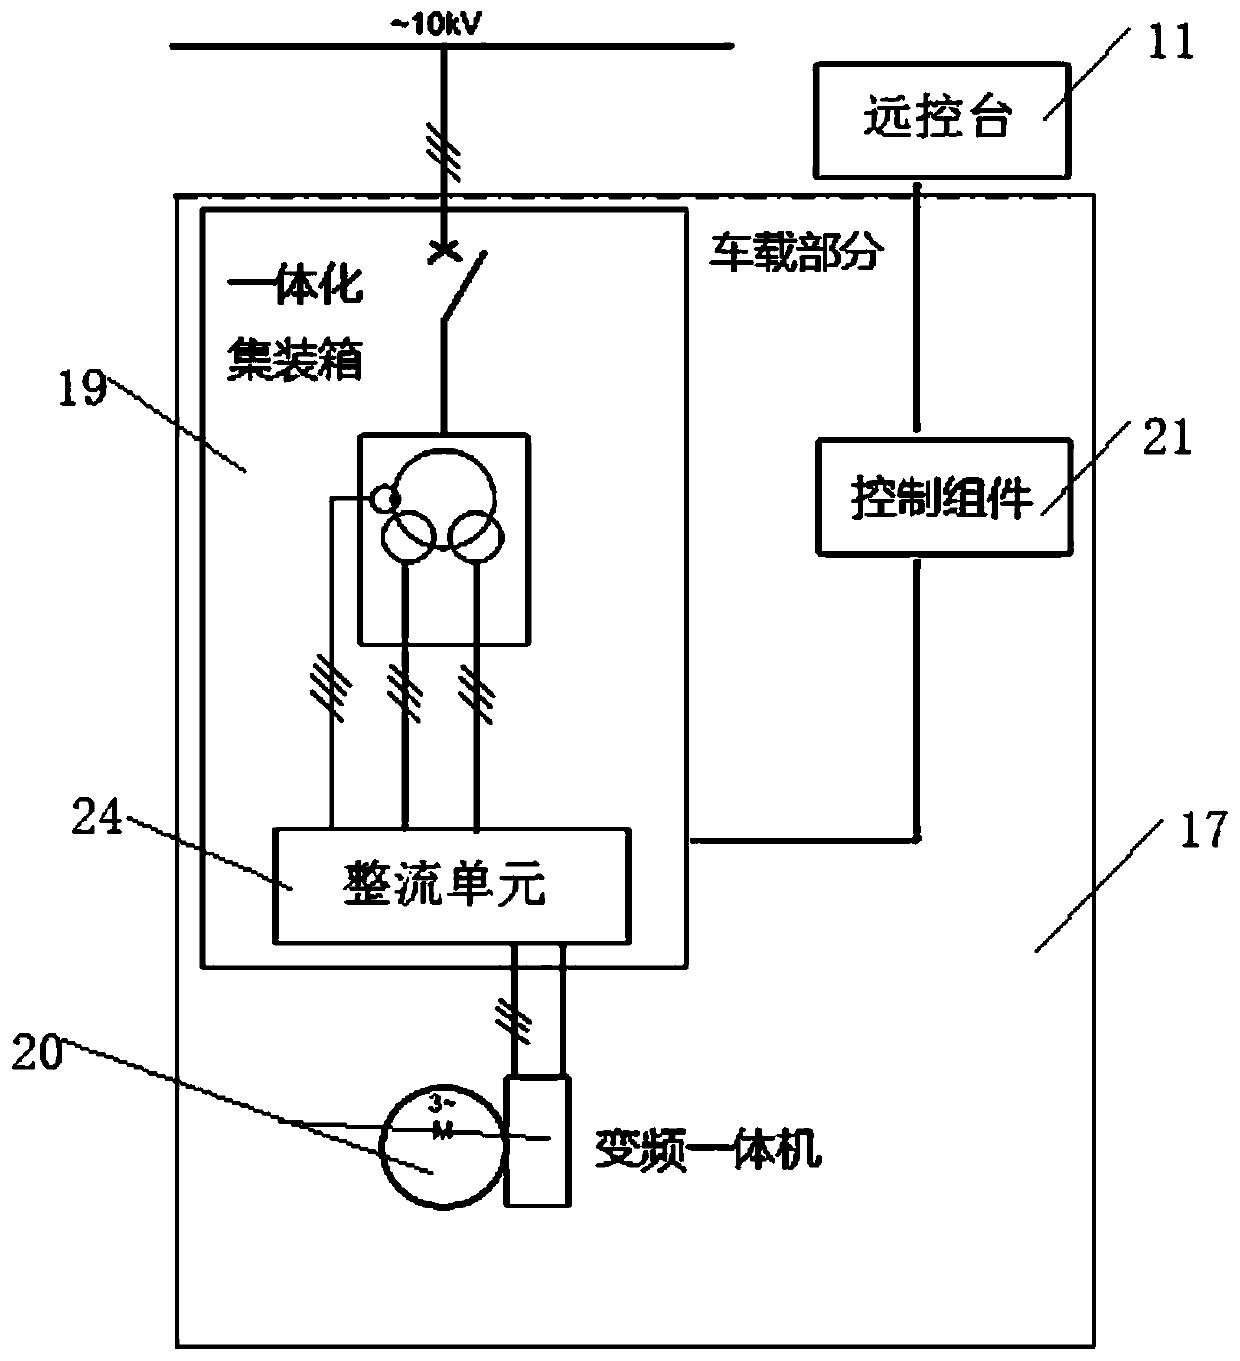 Integrated variable frequency fracturing pumping device control system and control method